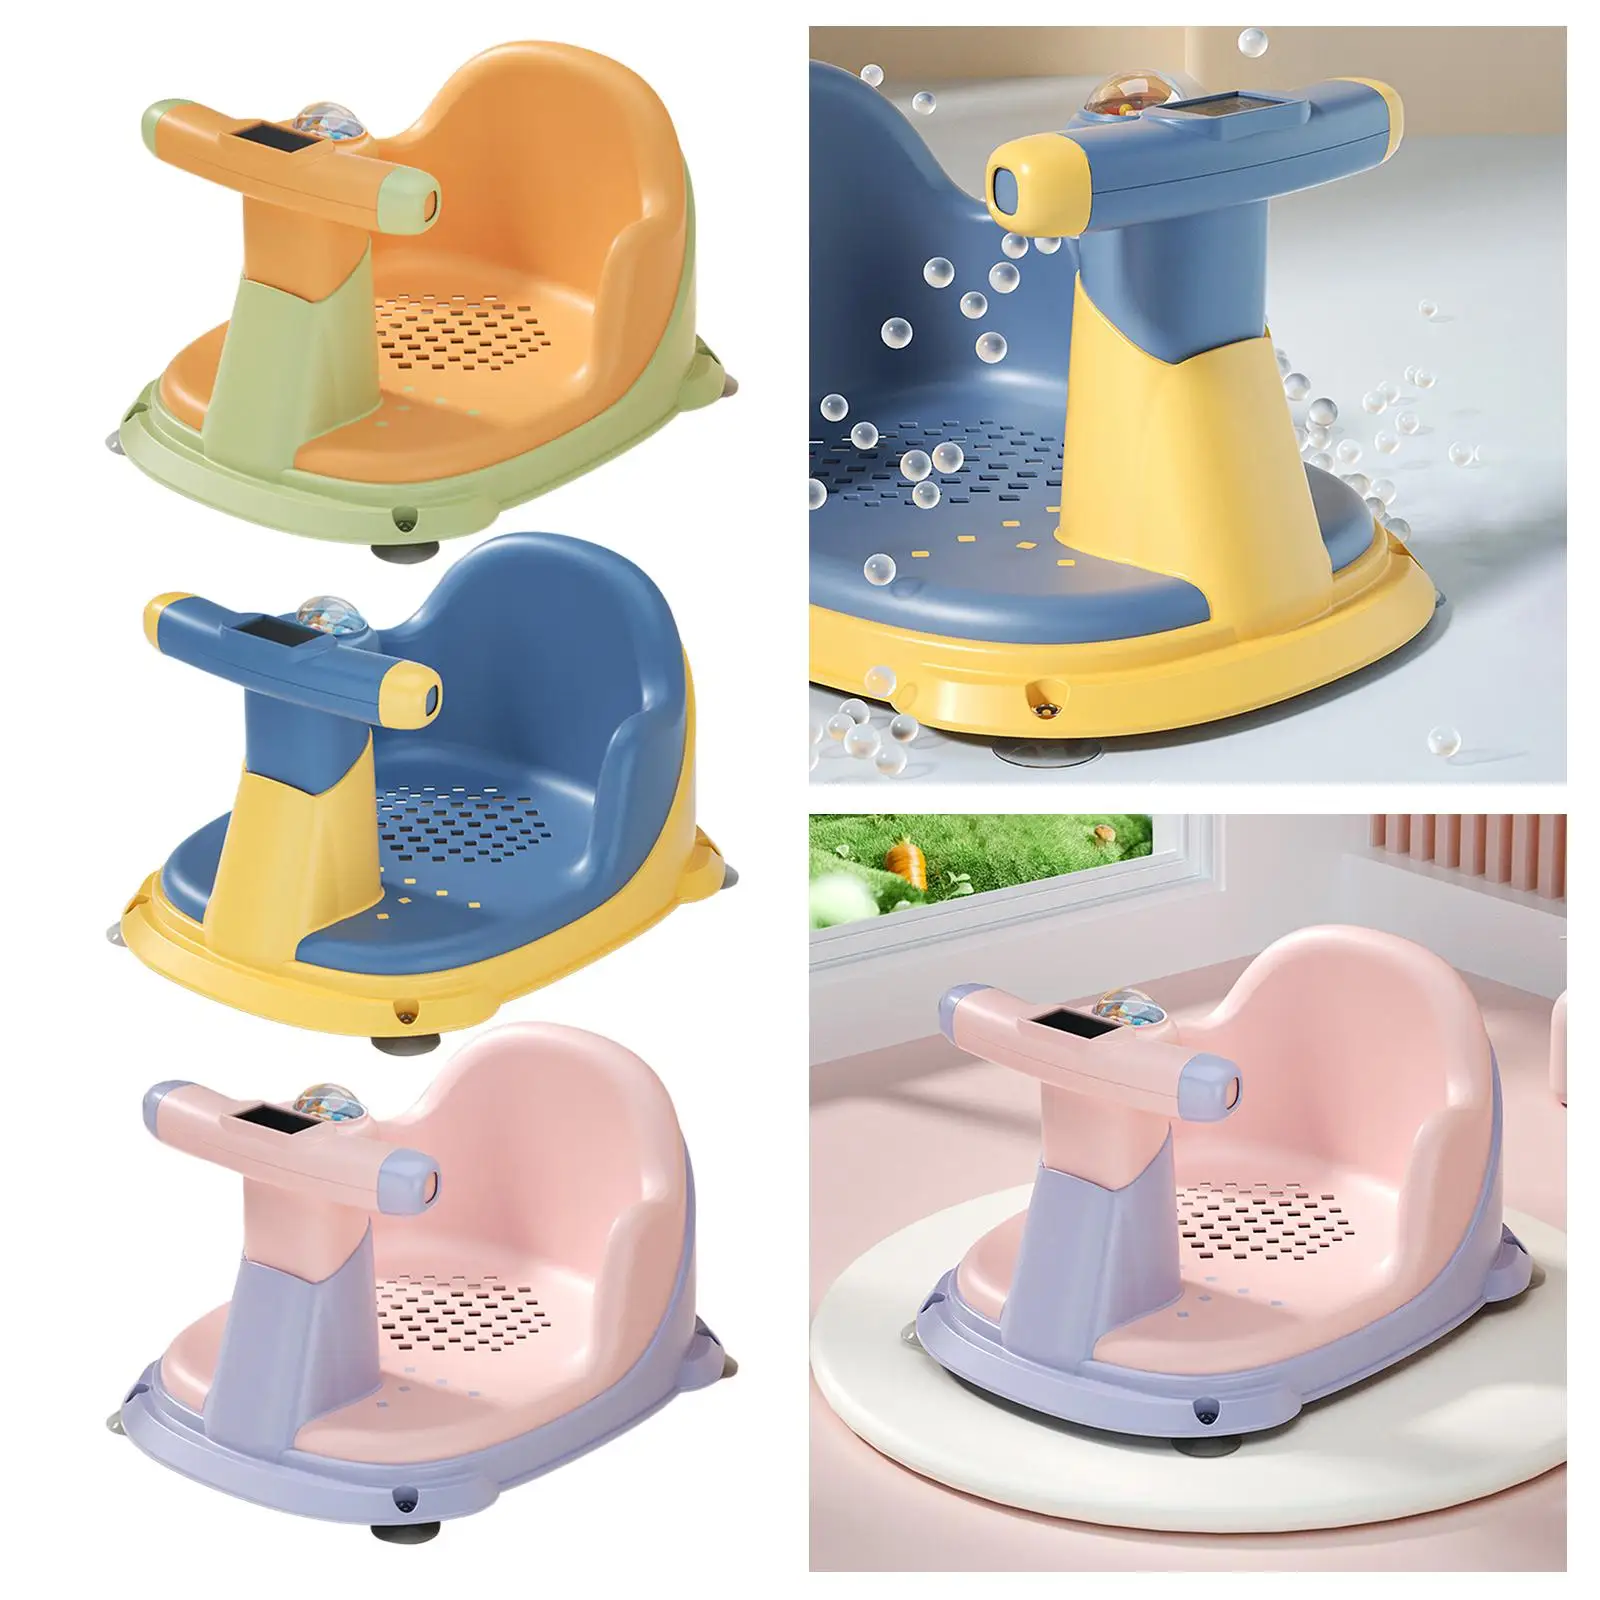 Bath Seat with Water Thermometer Tub Sitting up Anti Slip Chair with Suction Cup for Newborn Kids Shower Girls Boys Toddlers